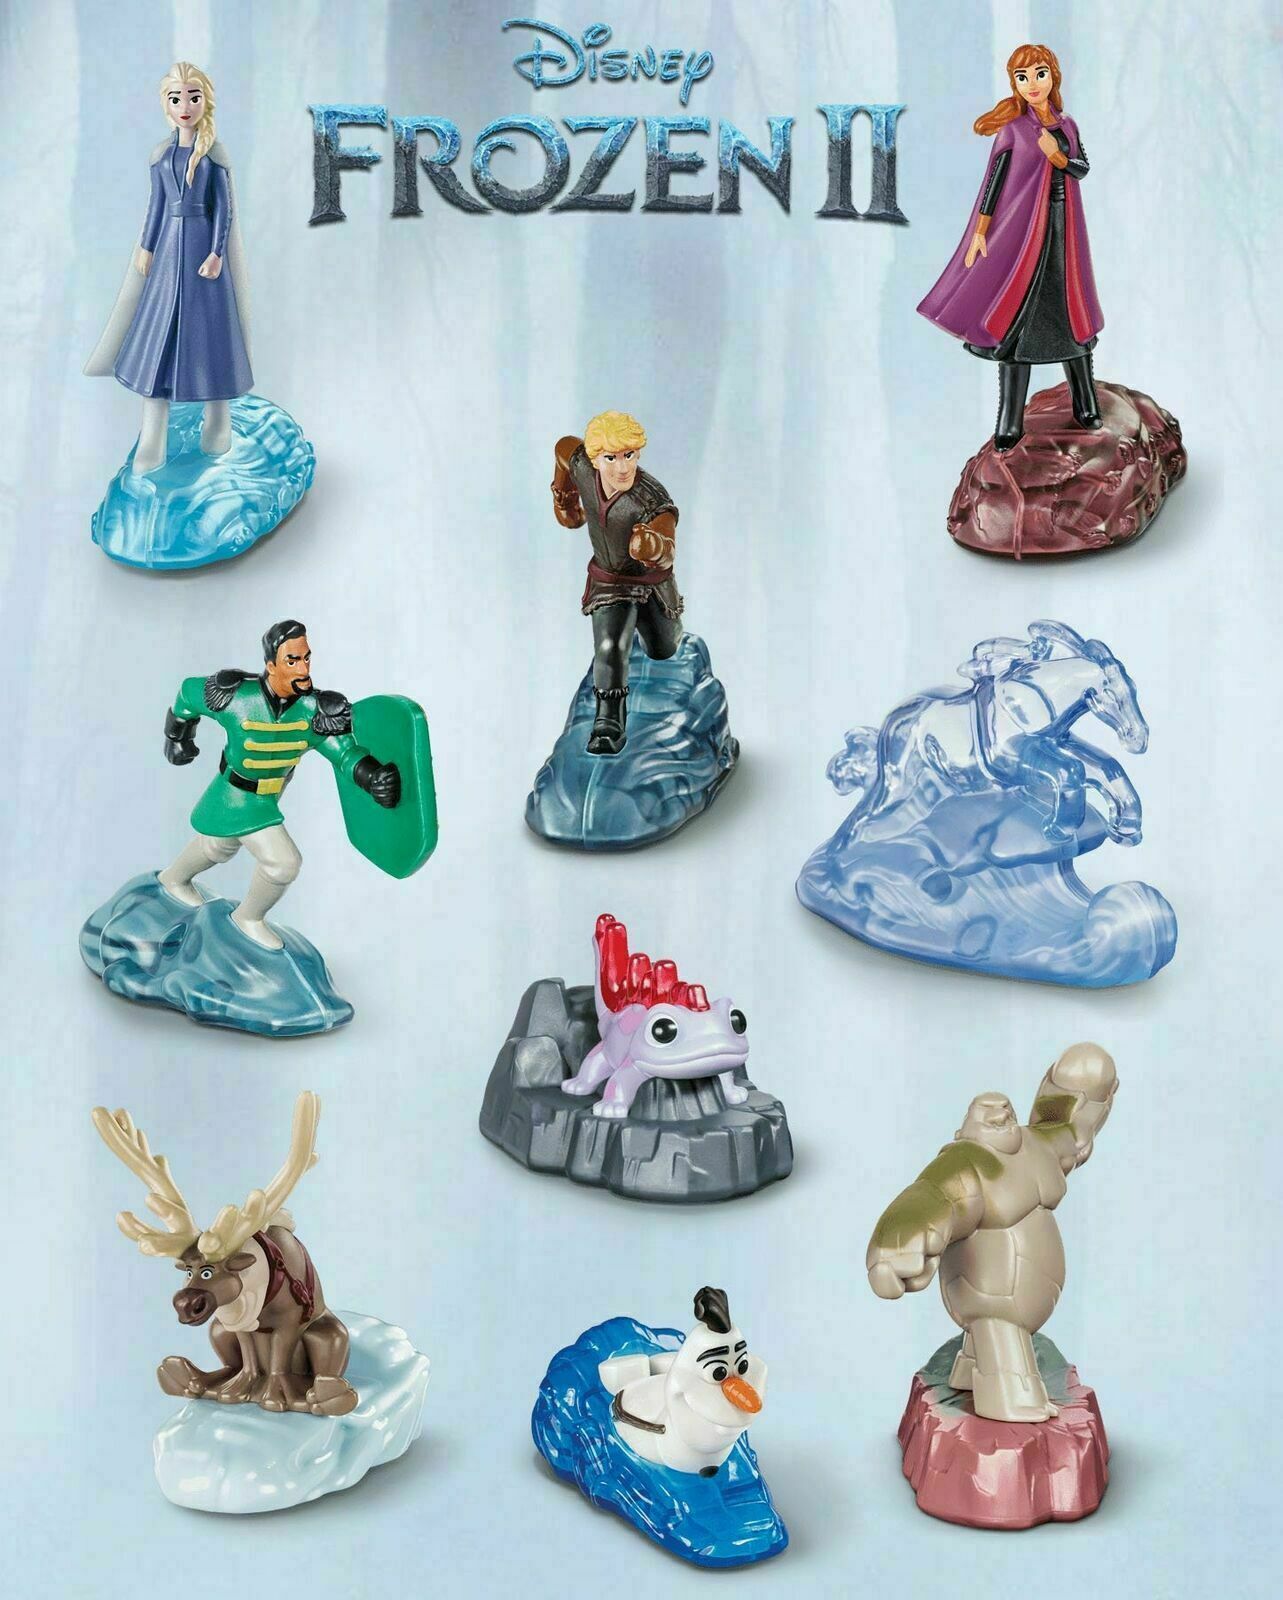 2019 Mcdonald's Frozen 2 Happy Meal Toys Choose Toy Or Complete Set